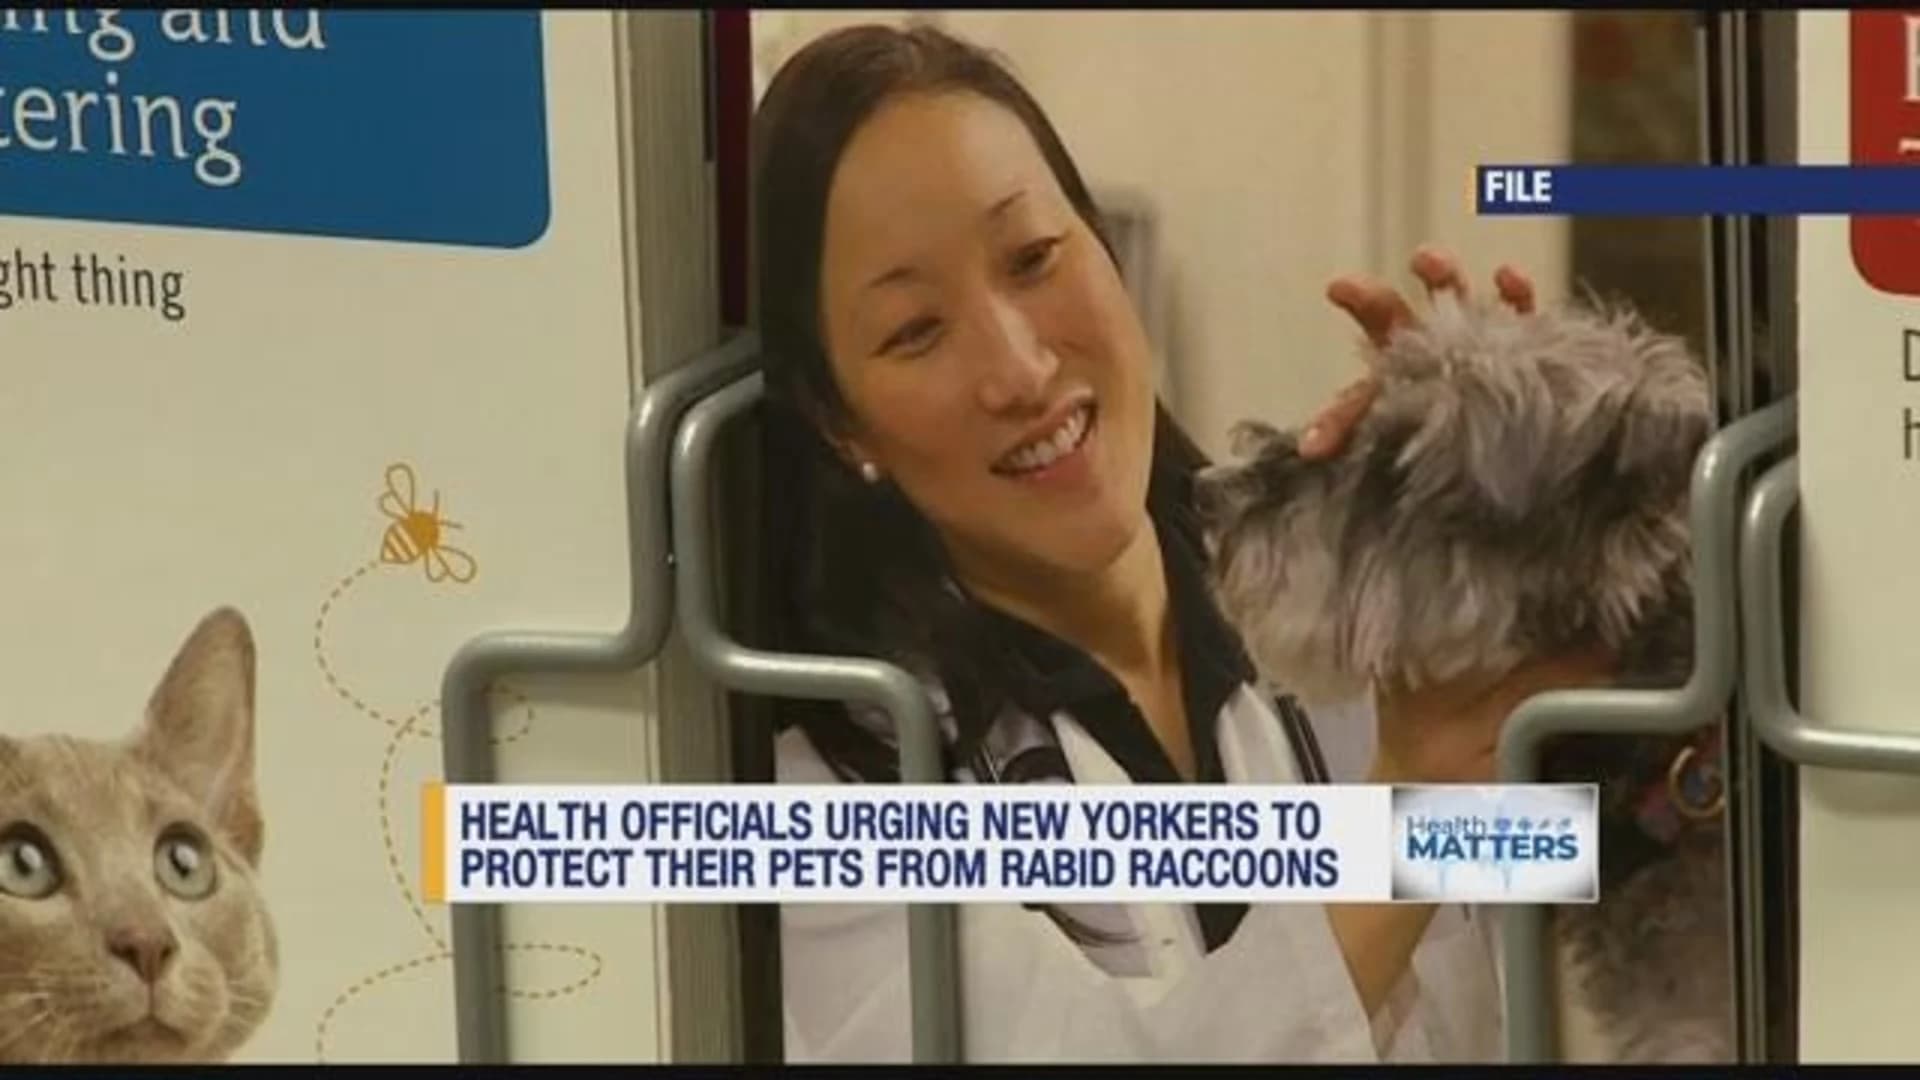 New Yorkers urged to vaccinate pets amid rabid raccoon scare